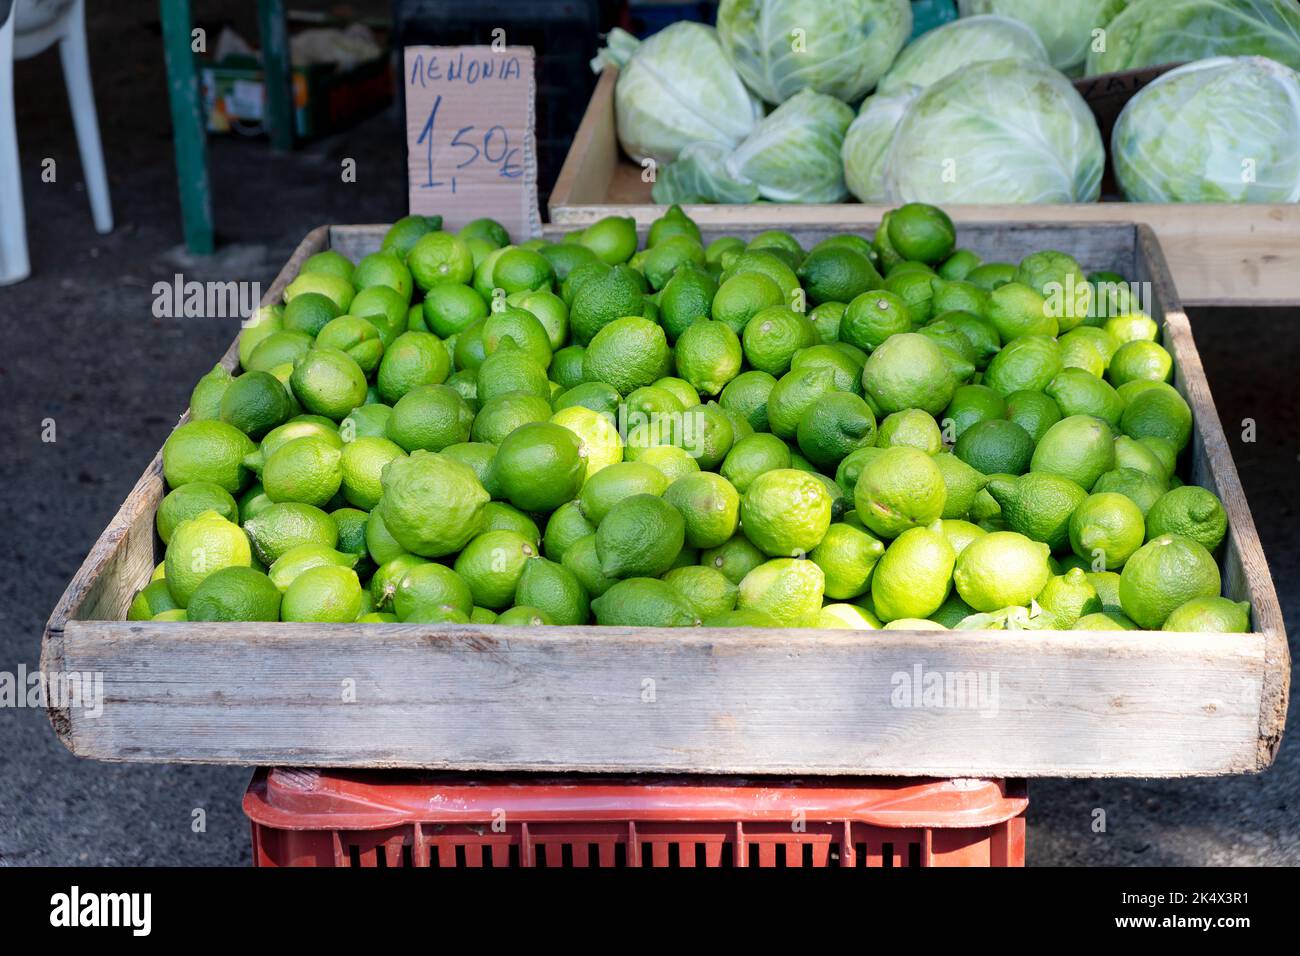 Freshly picked, in season lemons, Citrus limon, for sale on an open air market stall in Rhodes Greece. The lemons are displayed in a box and priced Stock Photo